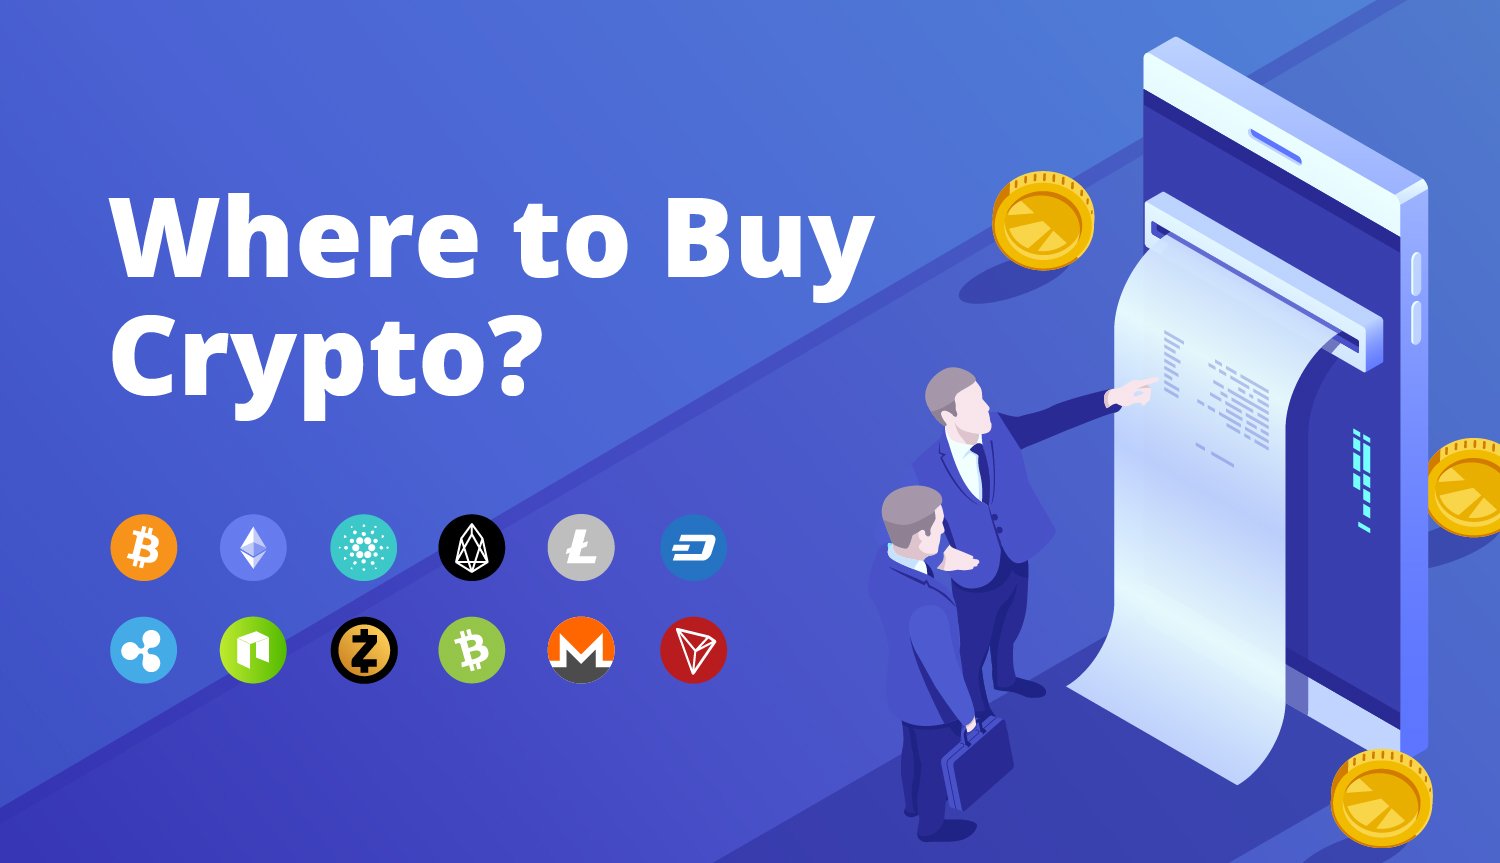 what kind of crypro can you buy on crypto.com